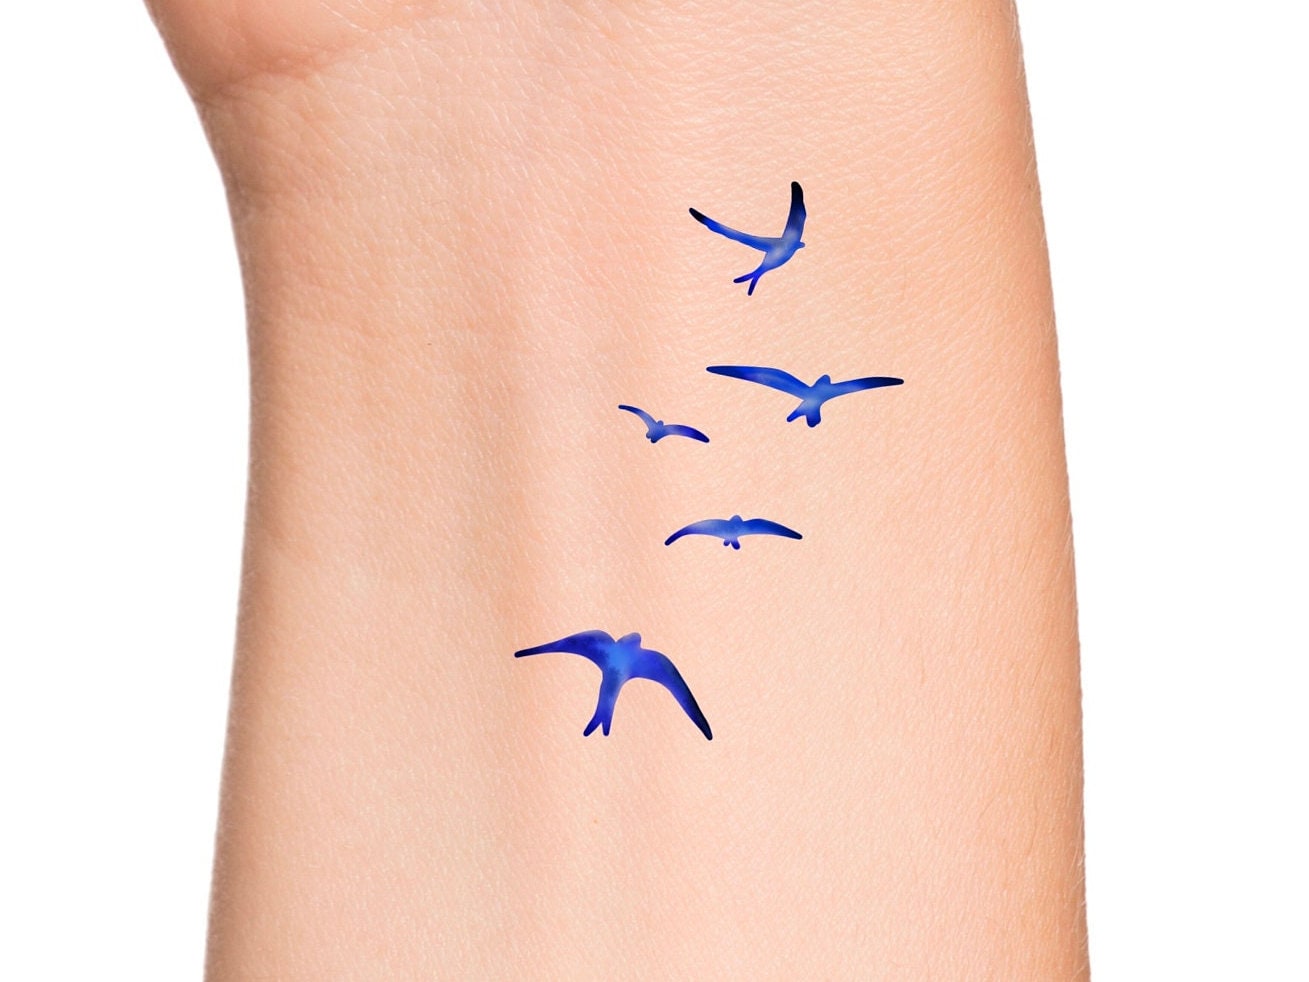 100 Small Bird Tattoos Design Ideas with Intricate Images